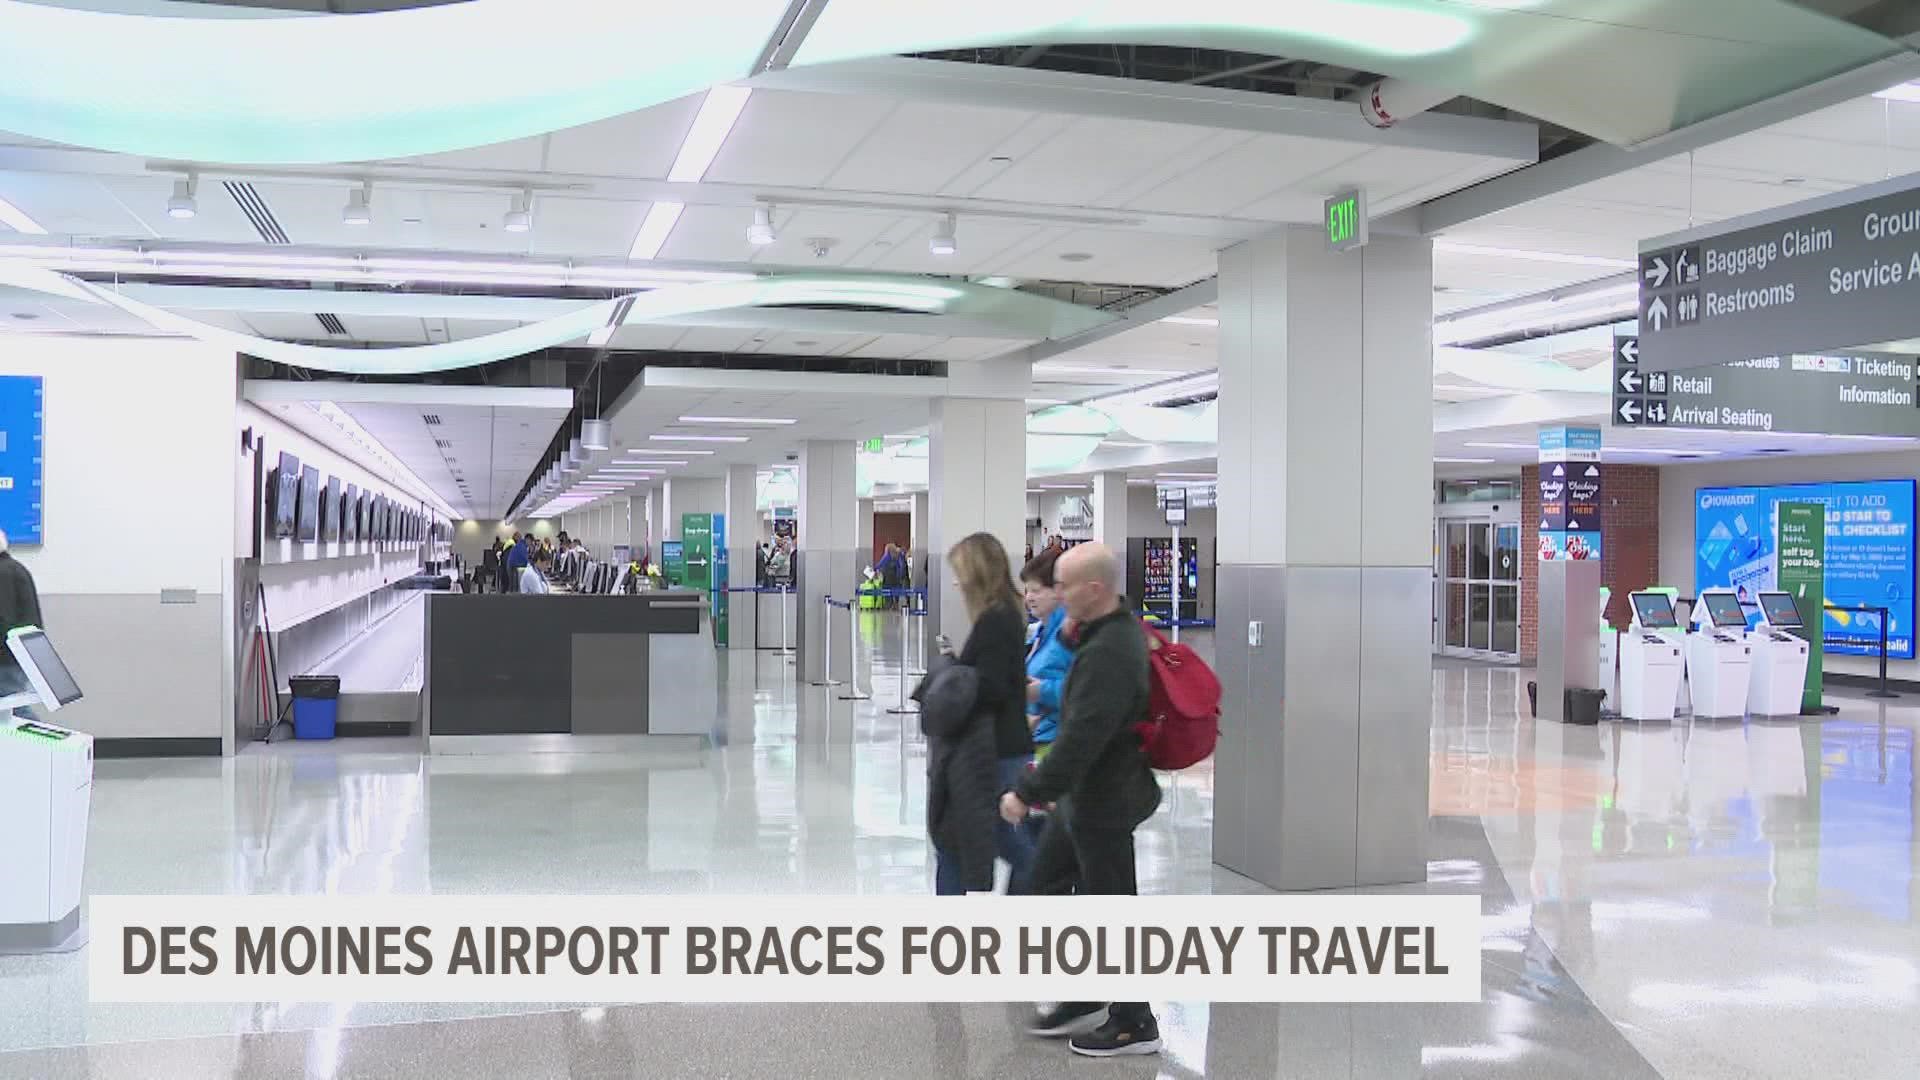 The Des Moines International Airport is bracing for a high volume of travelers, as they expect 24,000 people to go through the airport terminal this week.